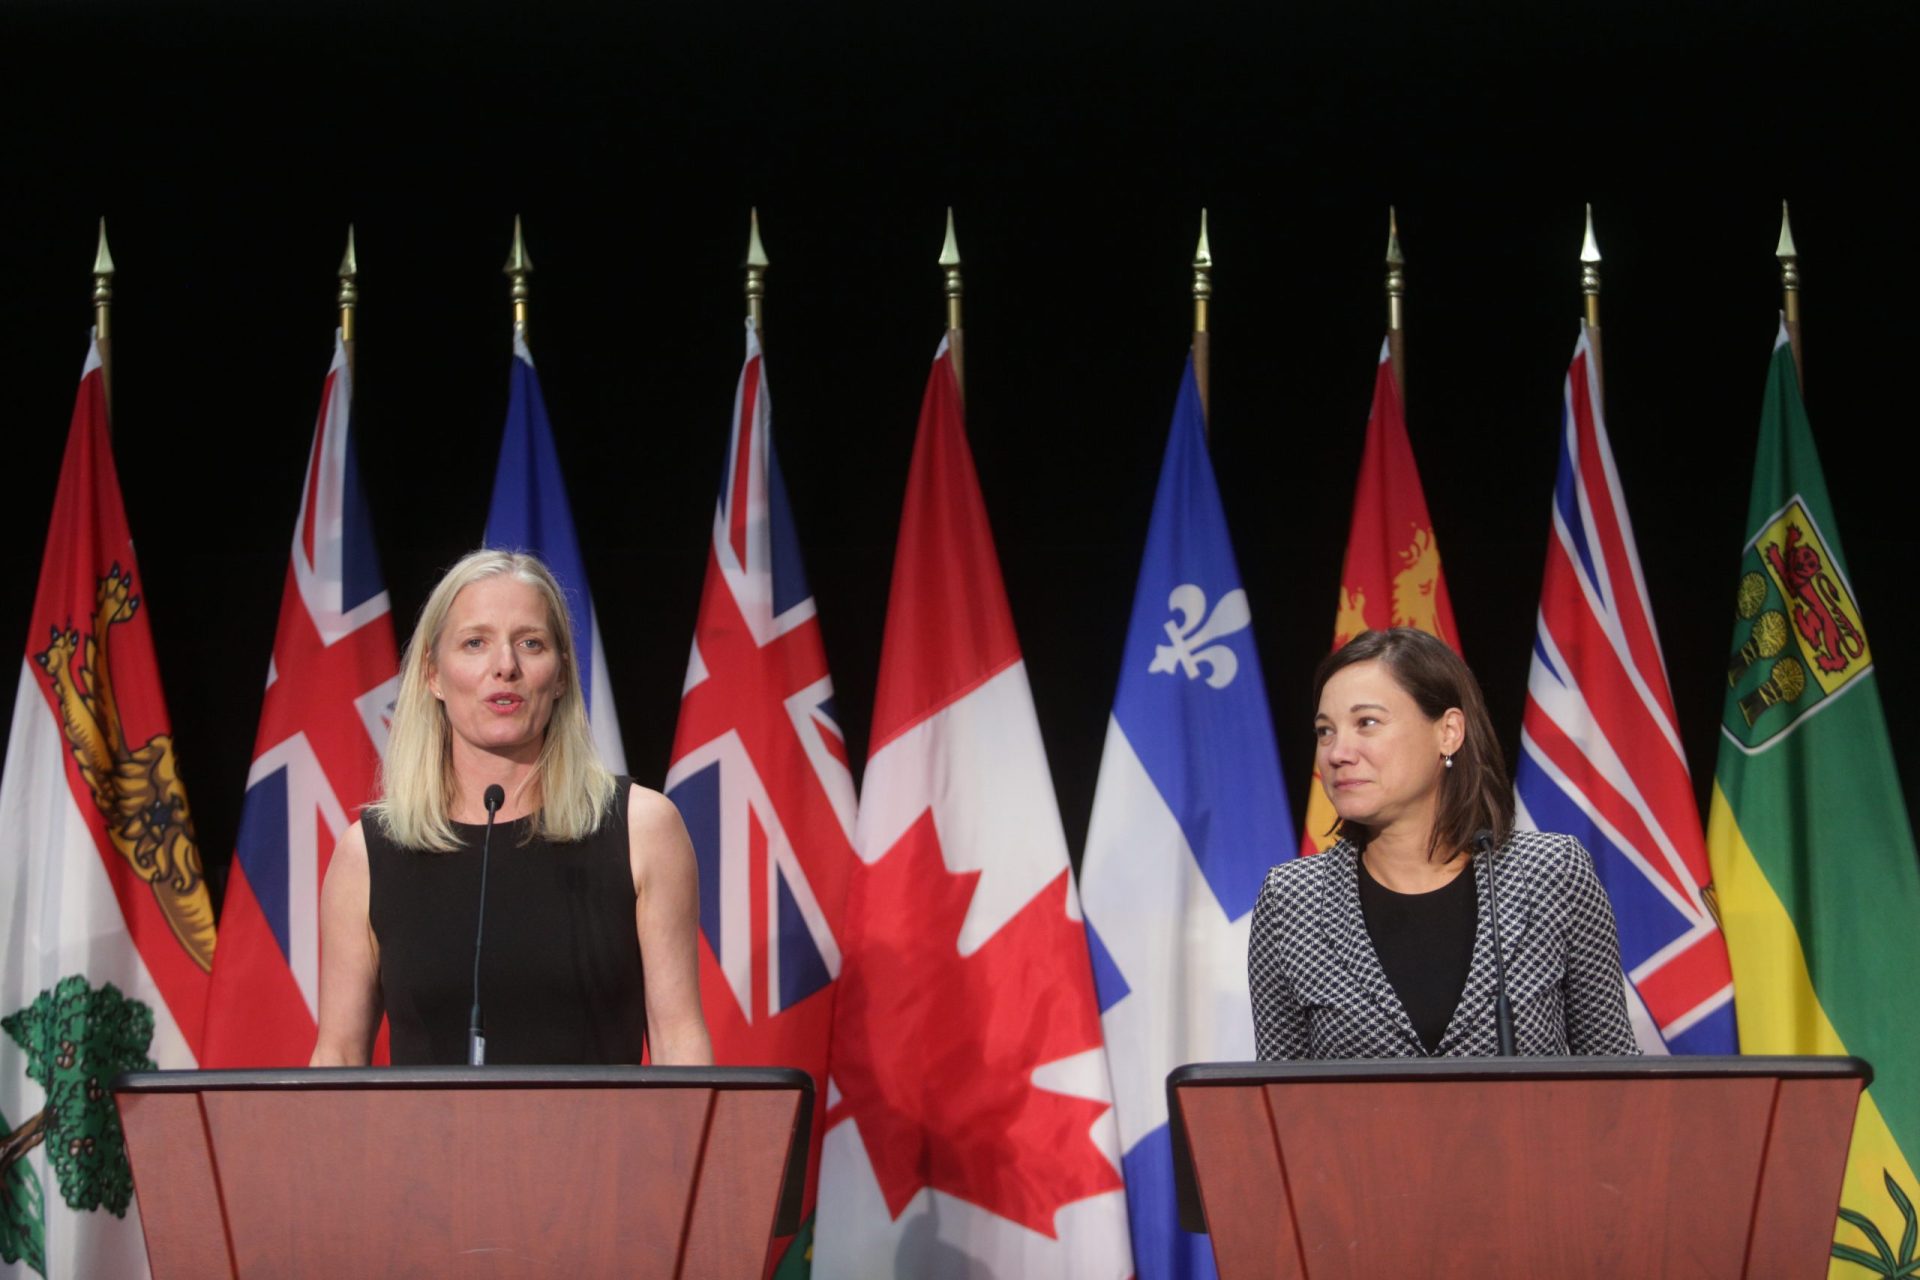 Minister of Environment and Climate Change, Catherine McKenna and Alberta’s Minister of Environment and Parks and the Minister Responsible for the Climate Change Office, Shannon Phillips, hold a press conference following a meeting with provincial and territorial environment ministers to discuss parks, protected areas, conservation, wildlife, and biodiversity in Canada on June 28, 2018.